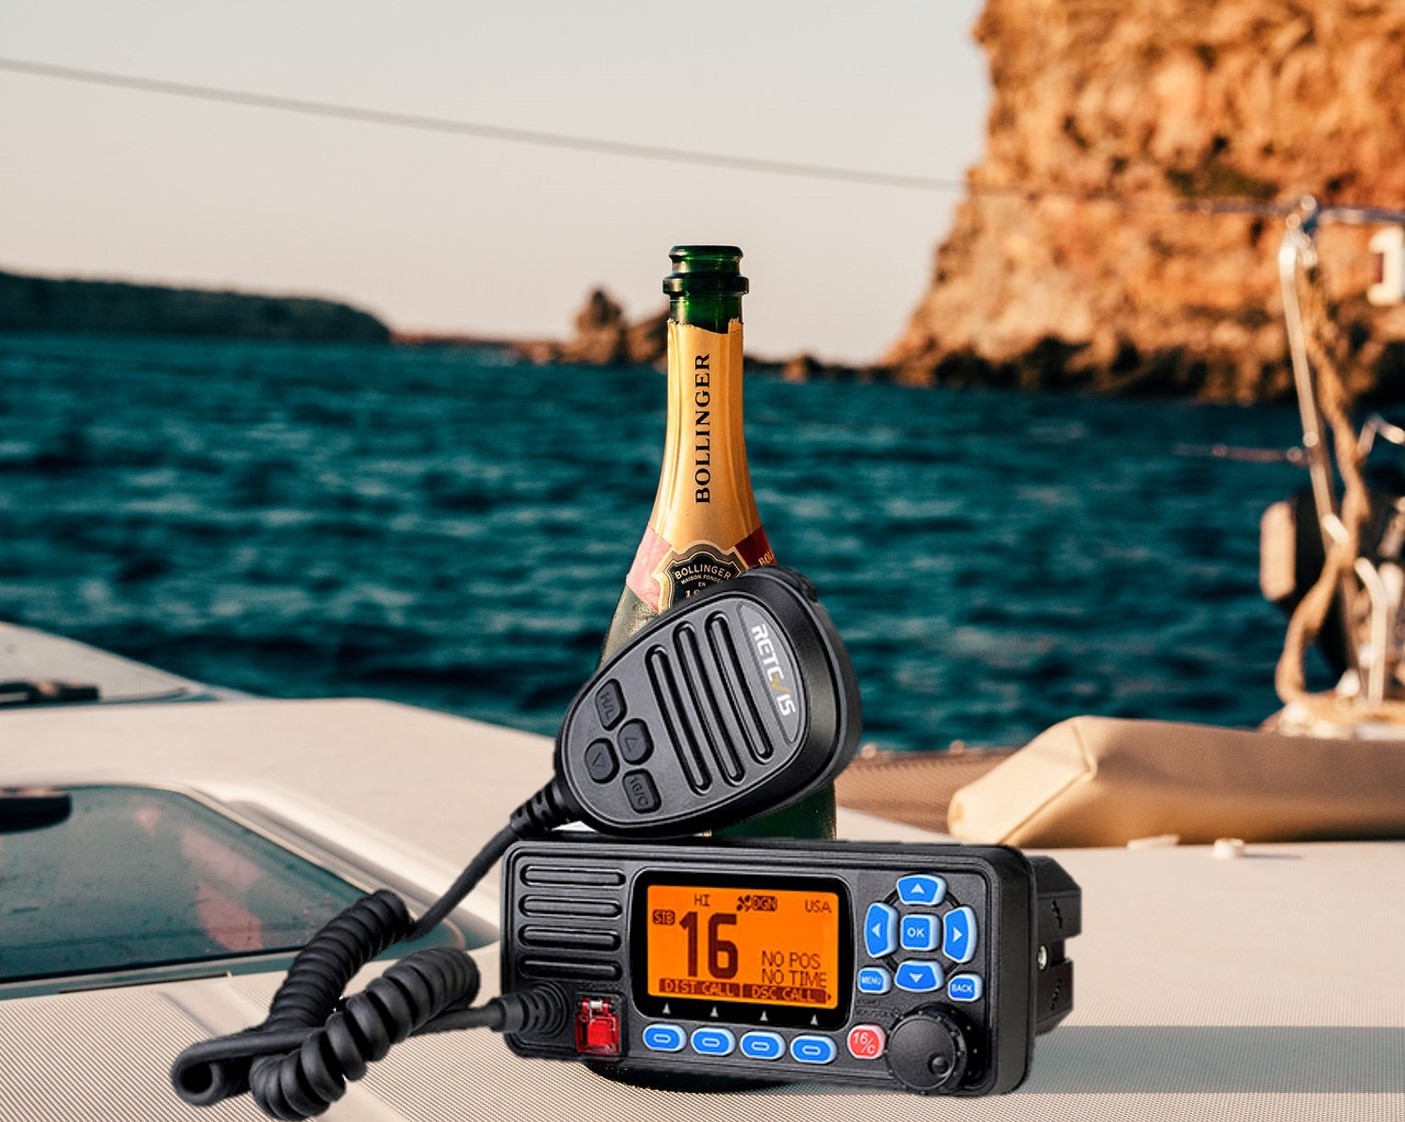 Several points that should be paid attention to when buying marine VHF radio